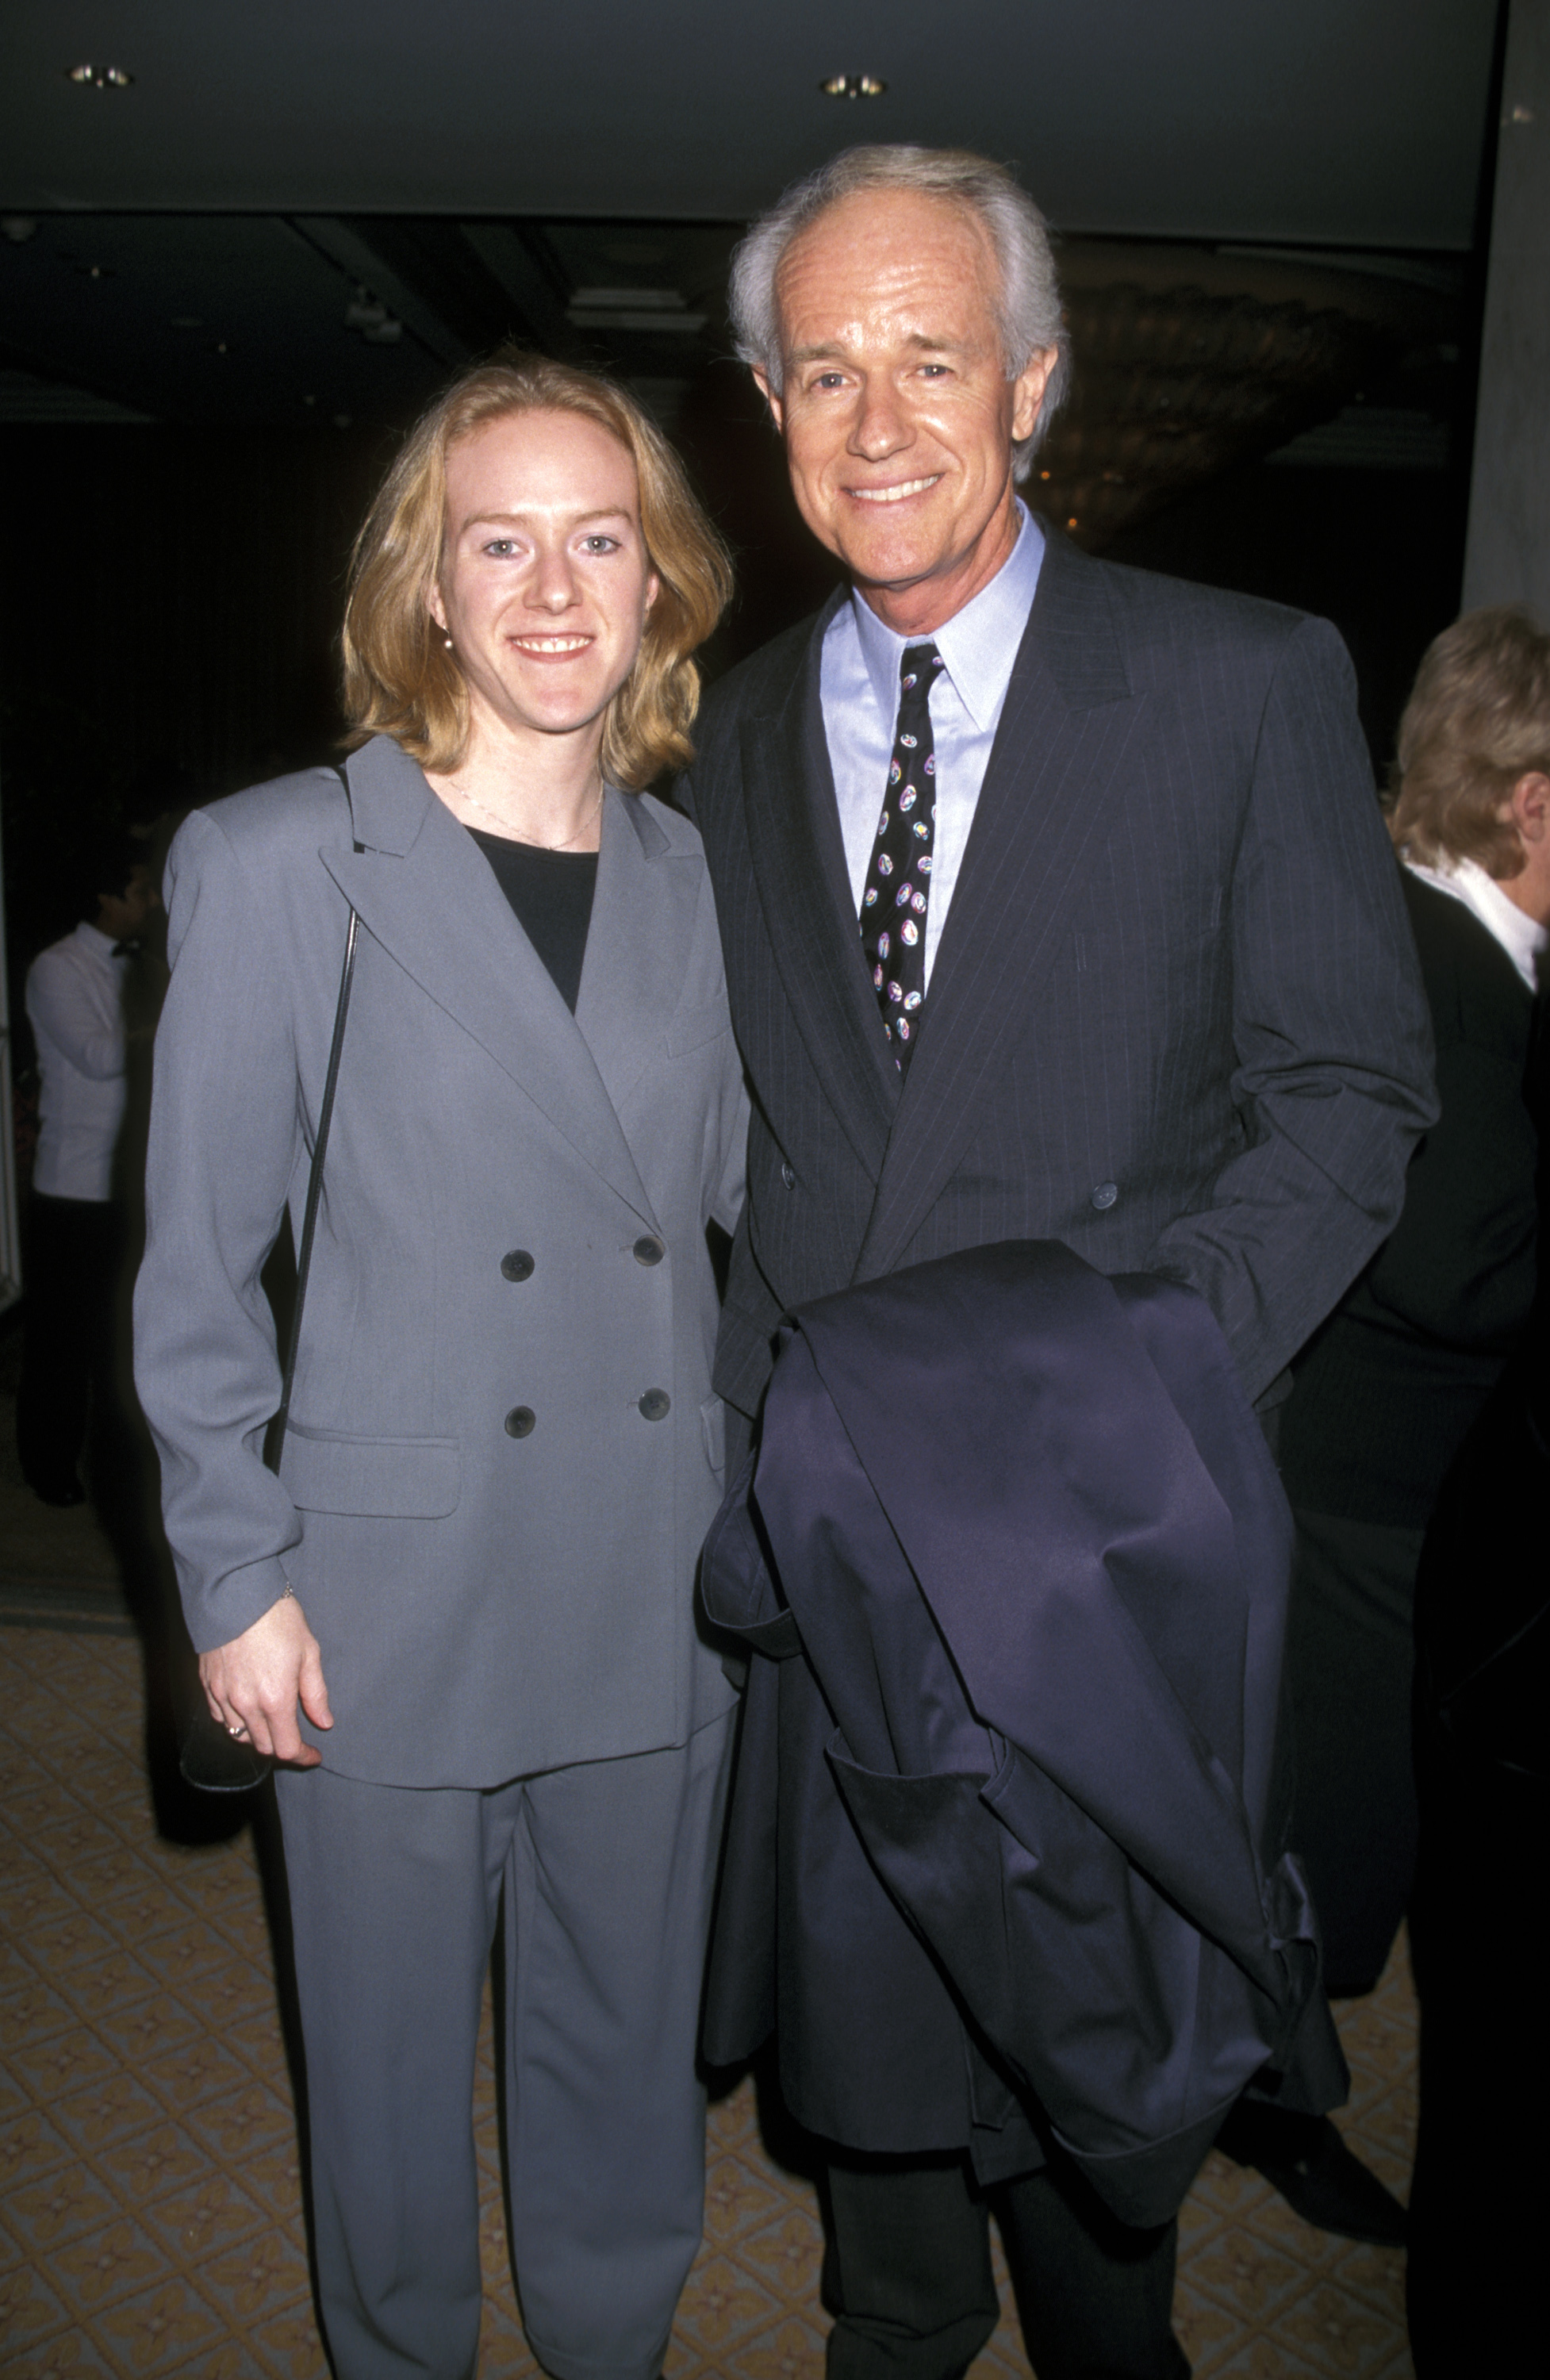 Erin and Mike Farrell at the Tourette Syndrome Association Honors R. Dreyfuss and O. Sacks event in Beverly Hills, 1998 | Source: Getty Images